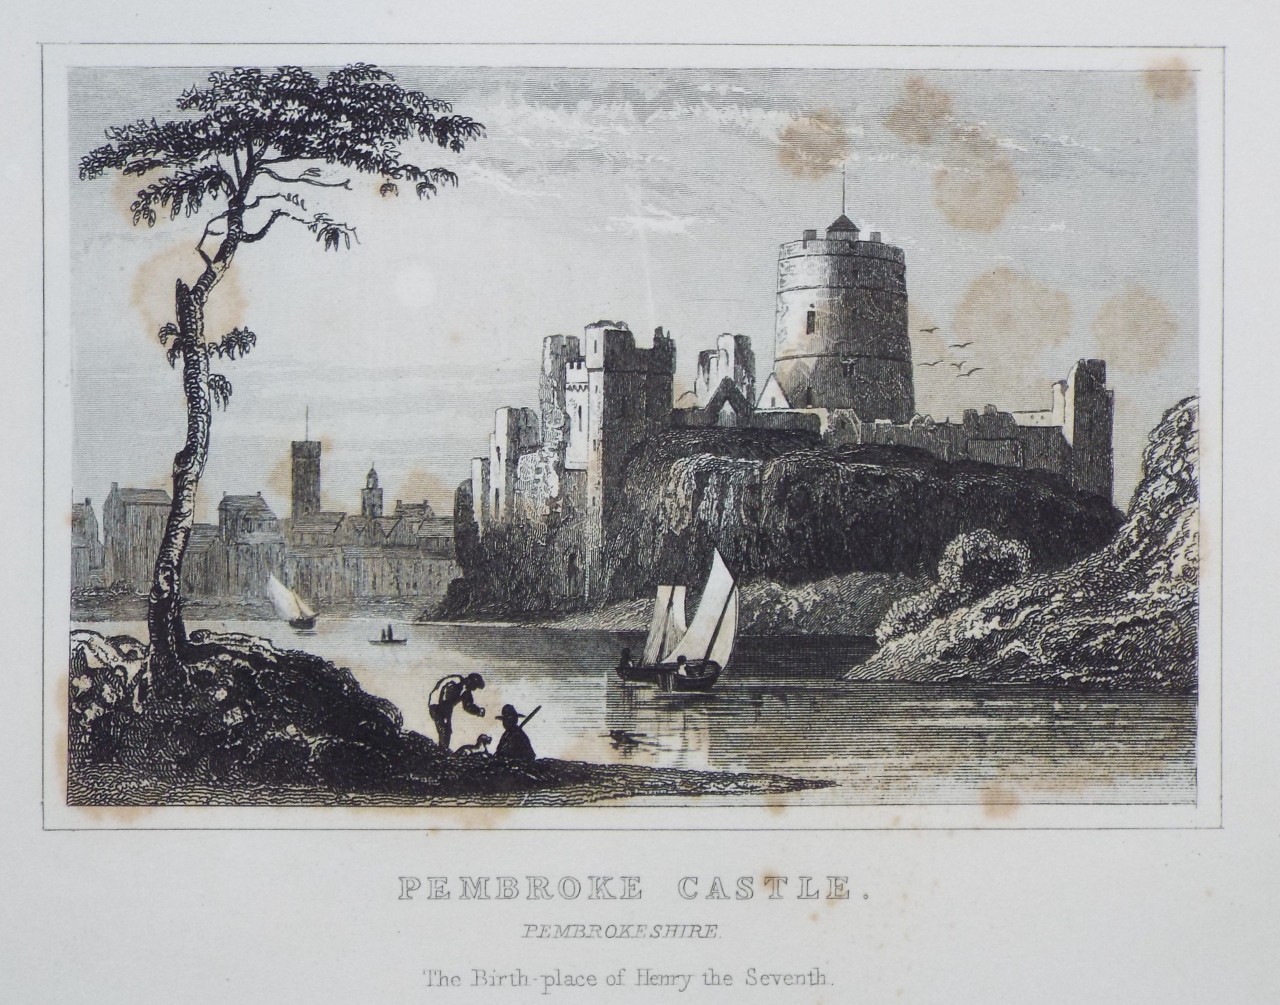 Print - Pembroke Castle, Pembrokeshire. The Birth place of Henry the Seventh.